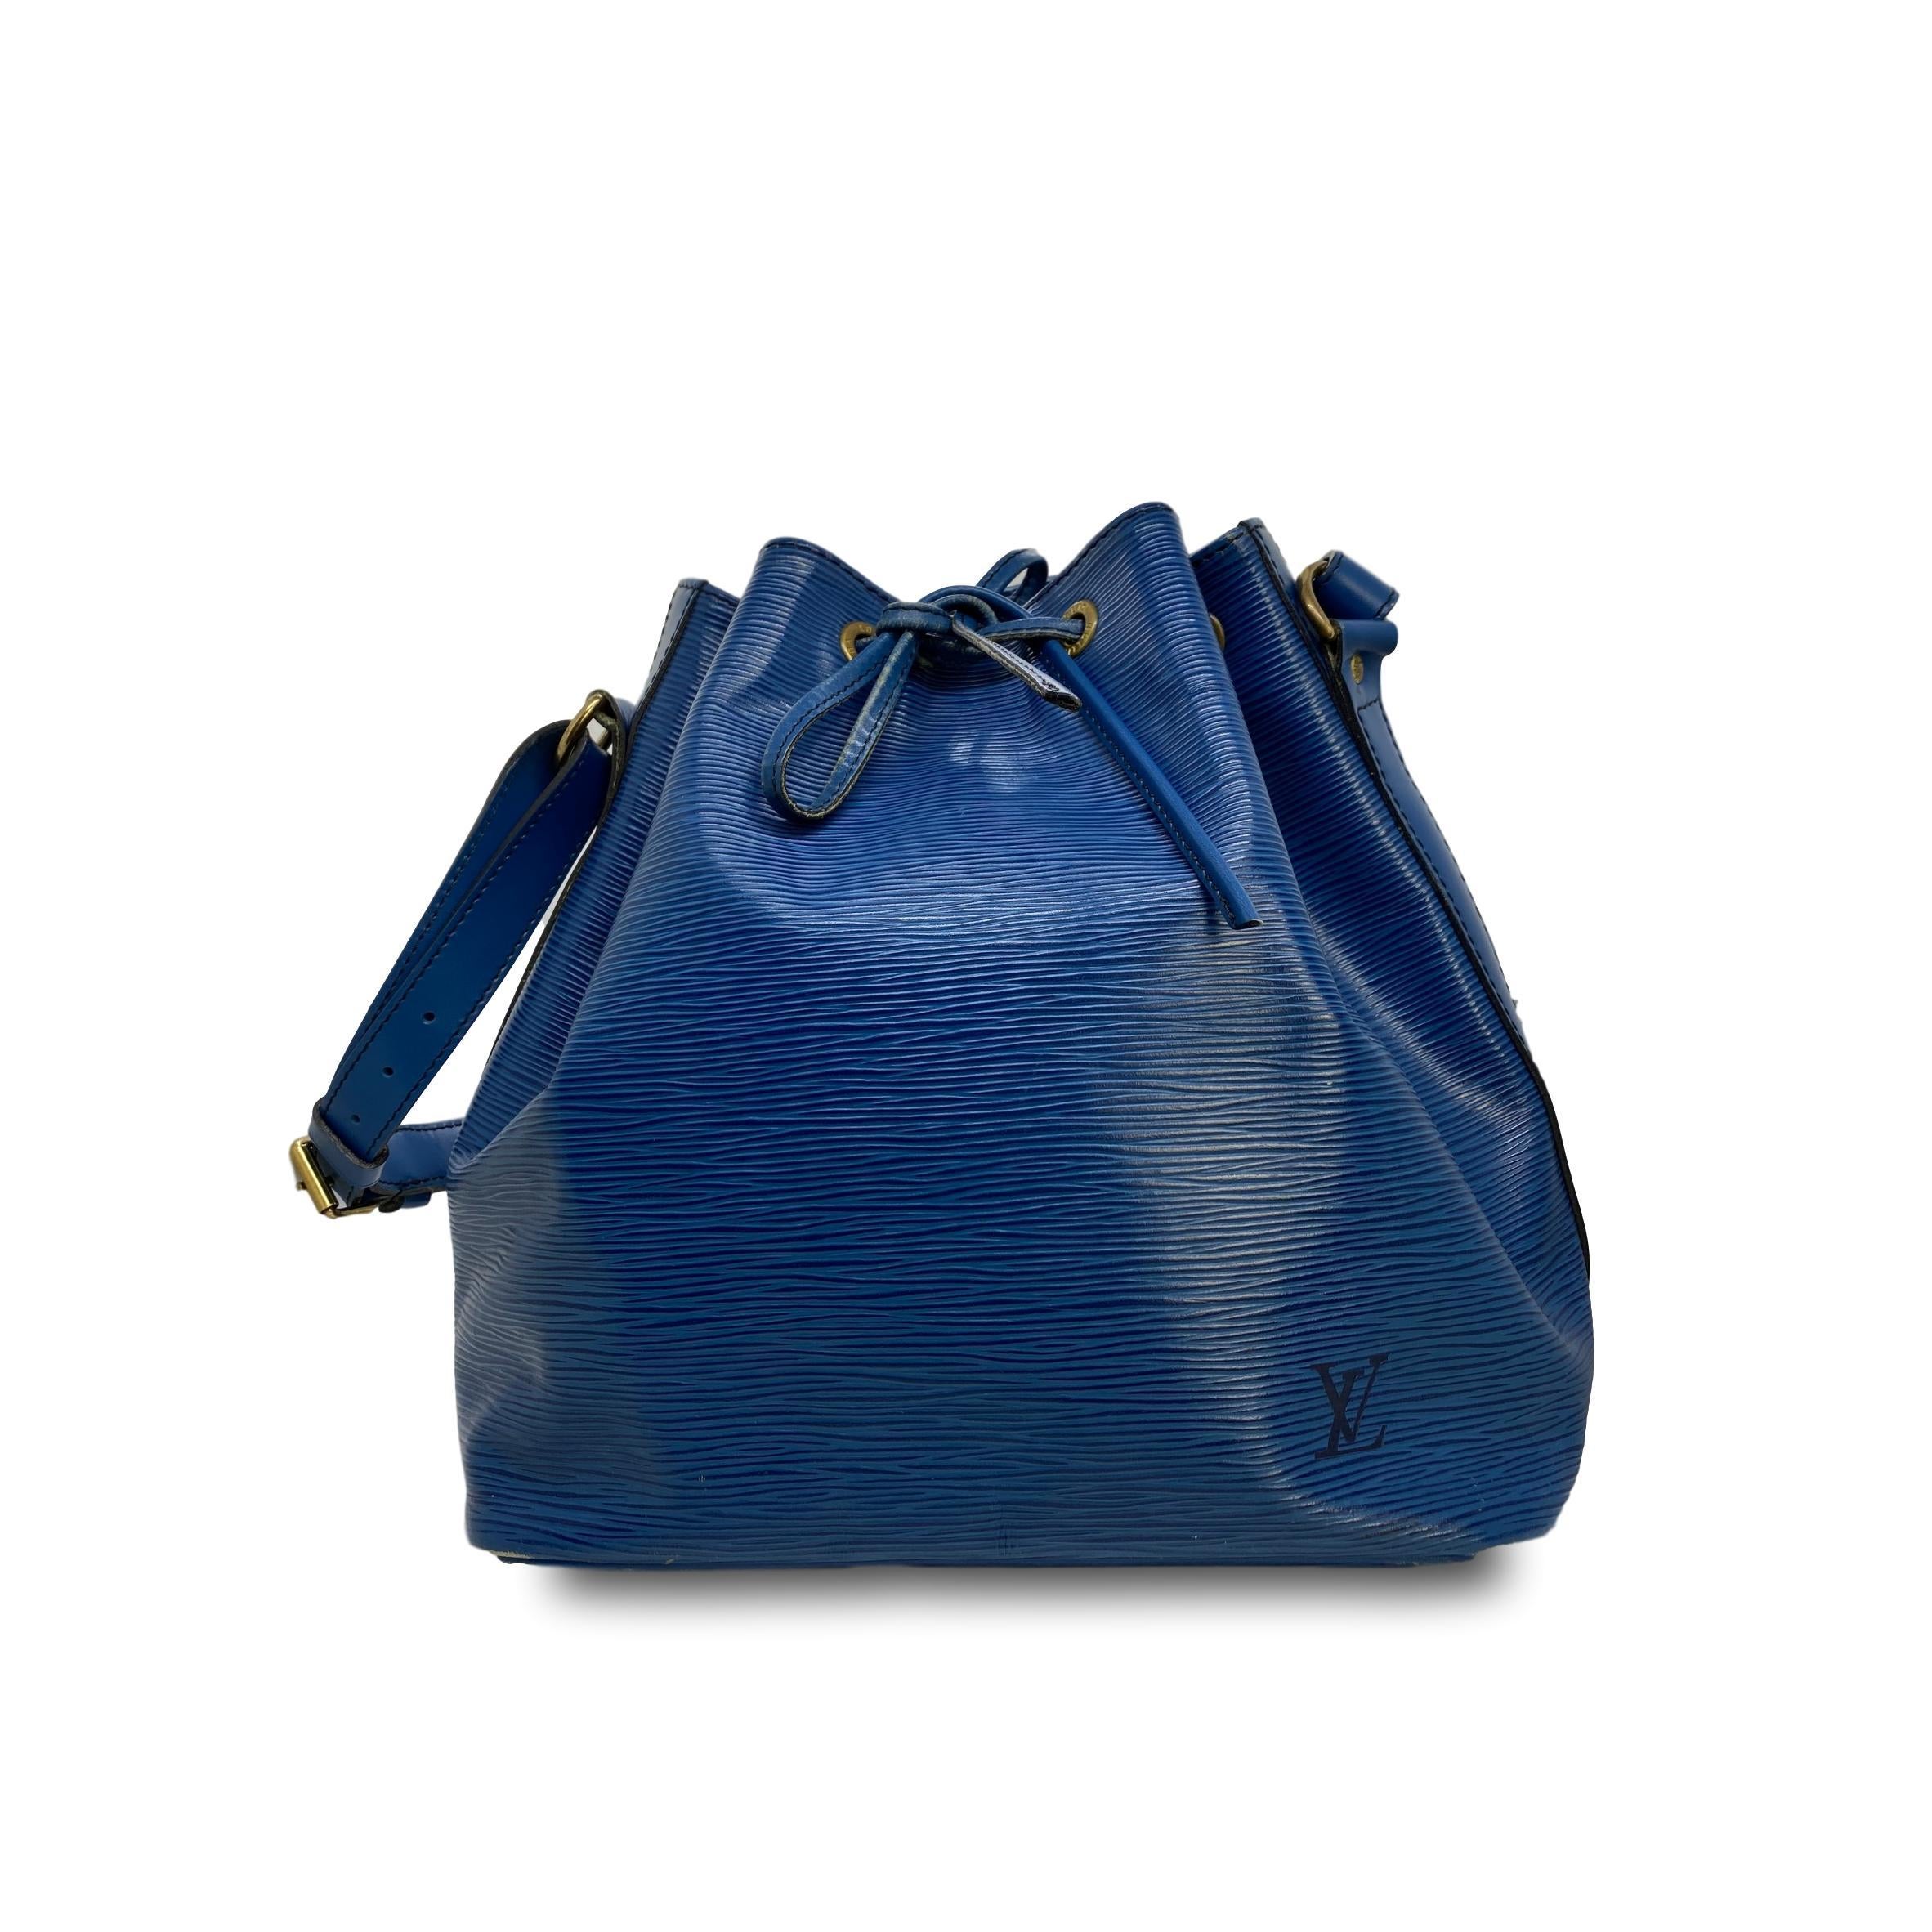 Vintage Louis Vuitton “Noe” Toledo Blue EPI Leather Bucket Bag, February 1995. Made in France, the Noe was originally designed by Louis Vuitton’s grandson in 1932 as a bag to carry champagne, specifically four bottles upright and one inverted in the